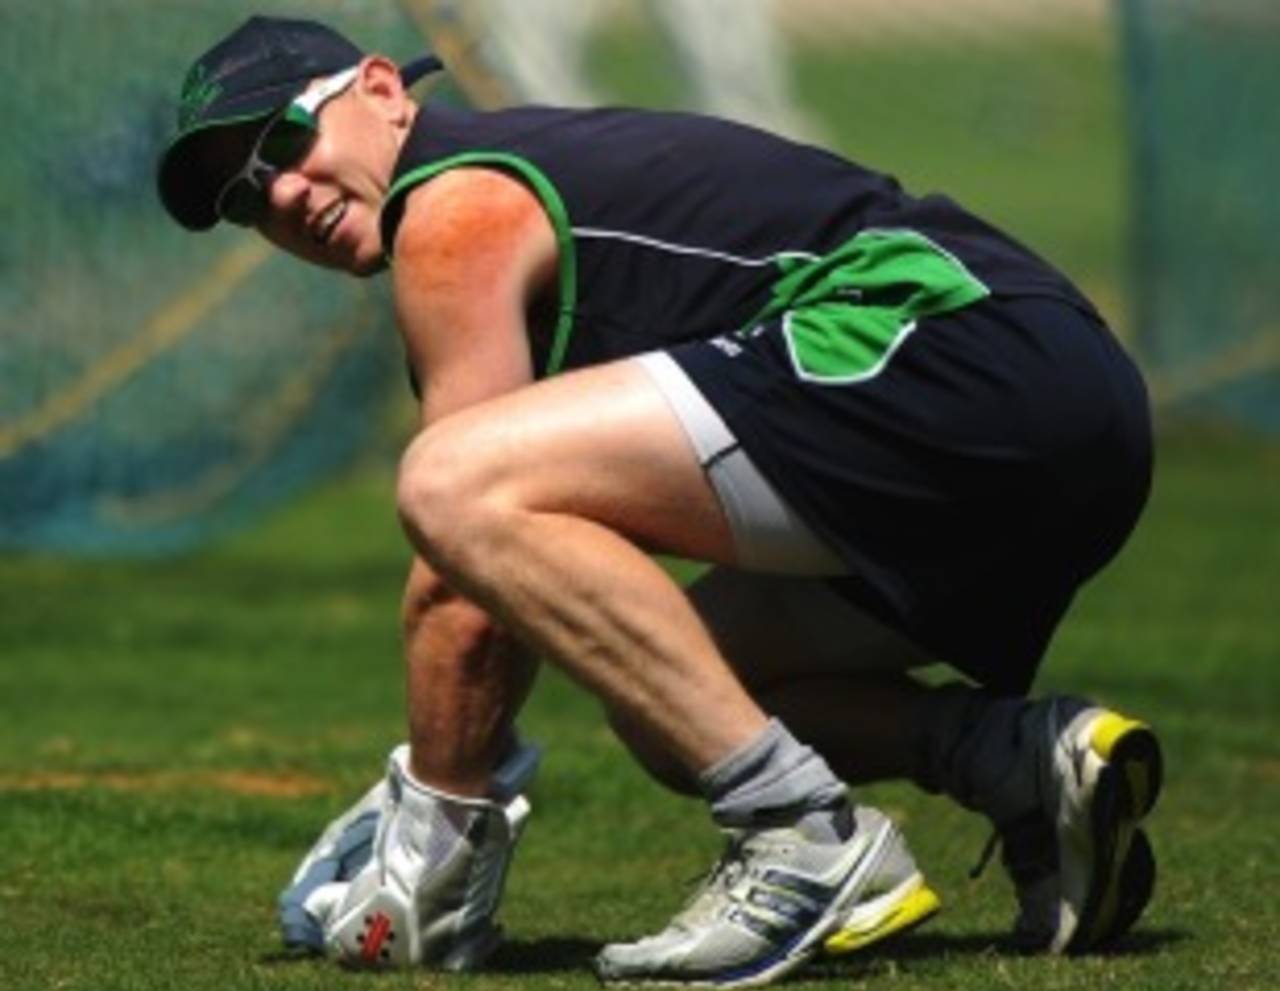 Niall O'Brien during a practice session on the eve of Ireland's game against England, World Cup, Bangalore, March 1, 2011